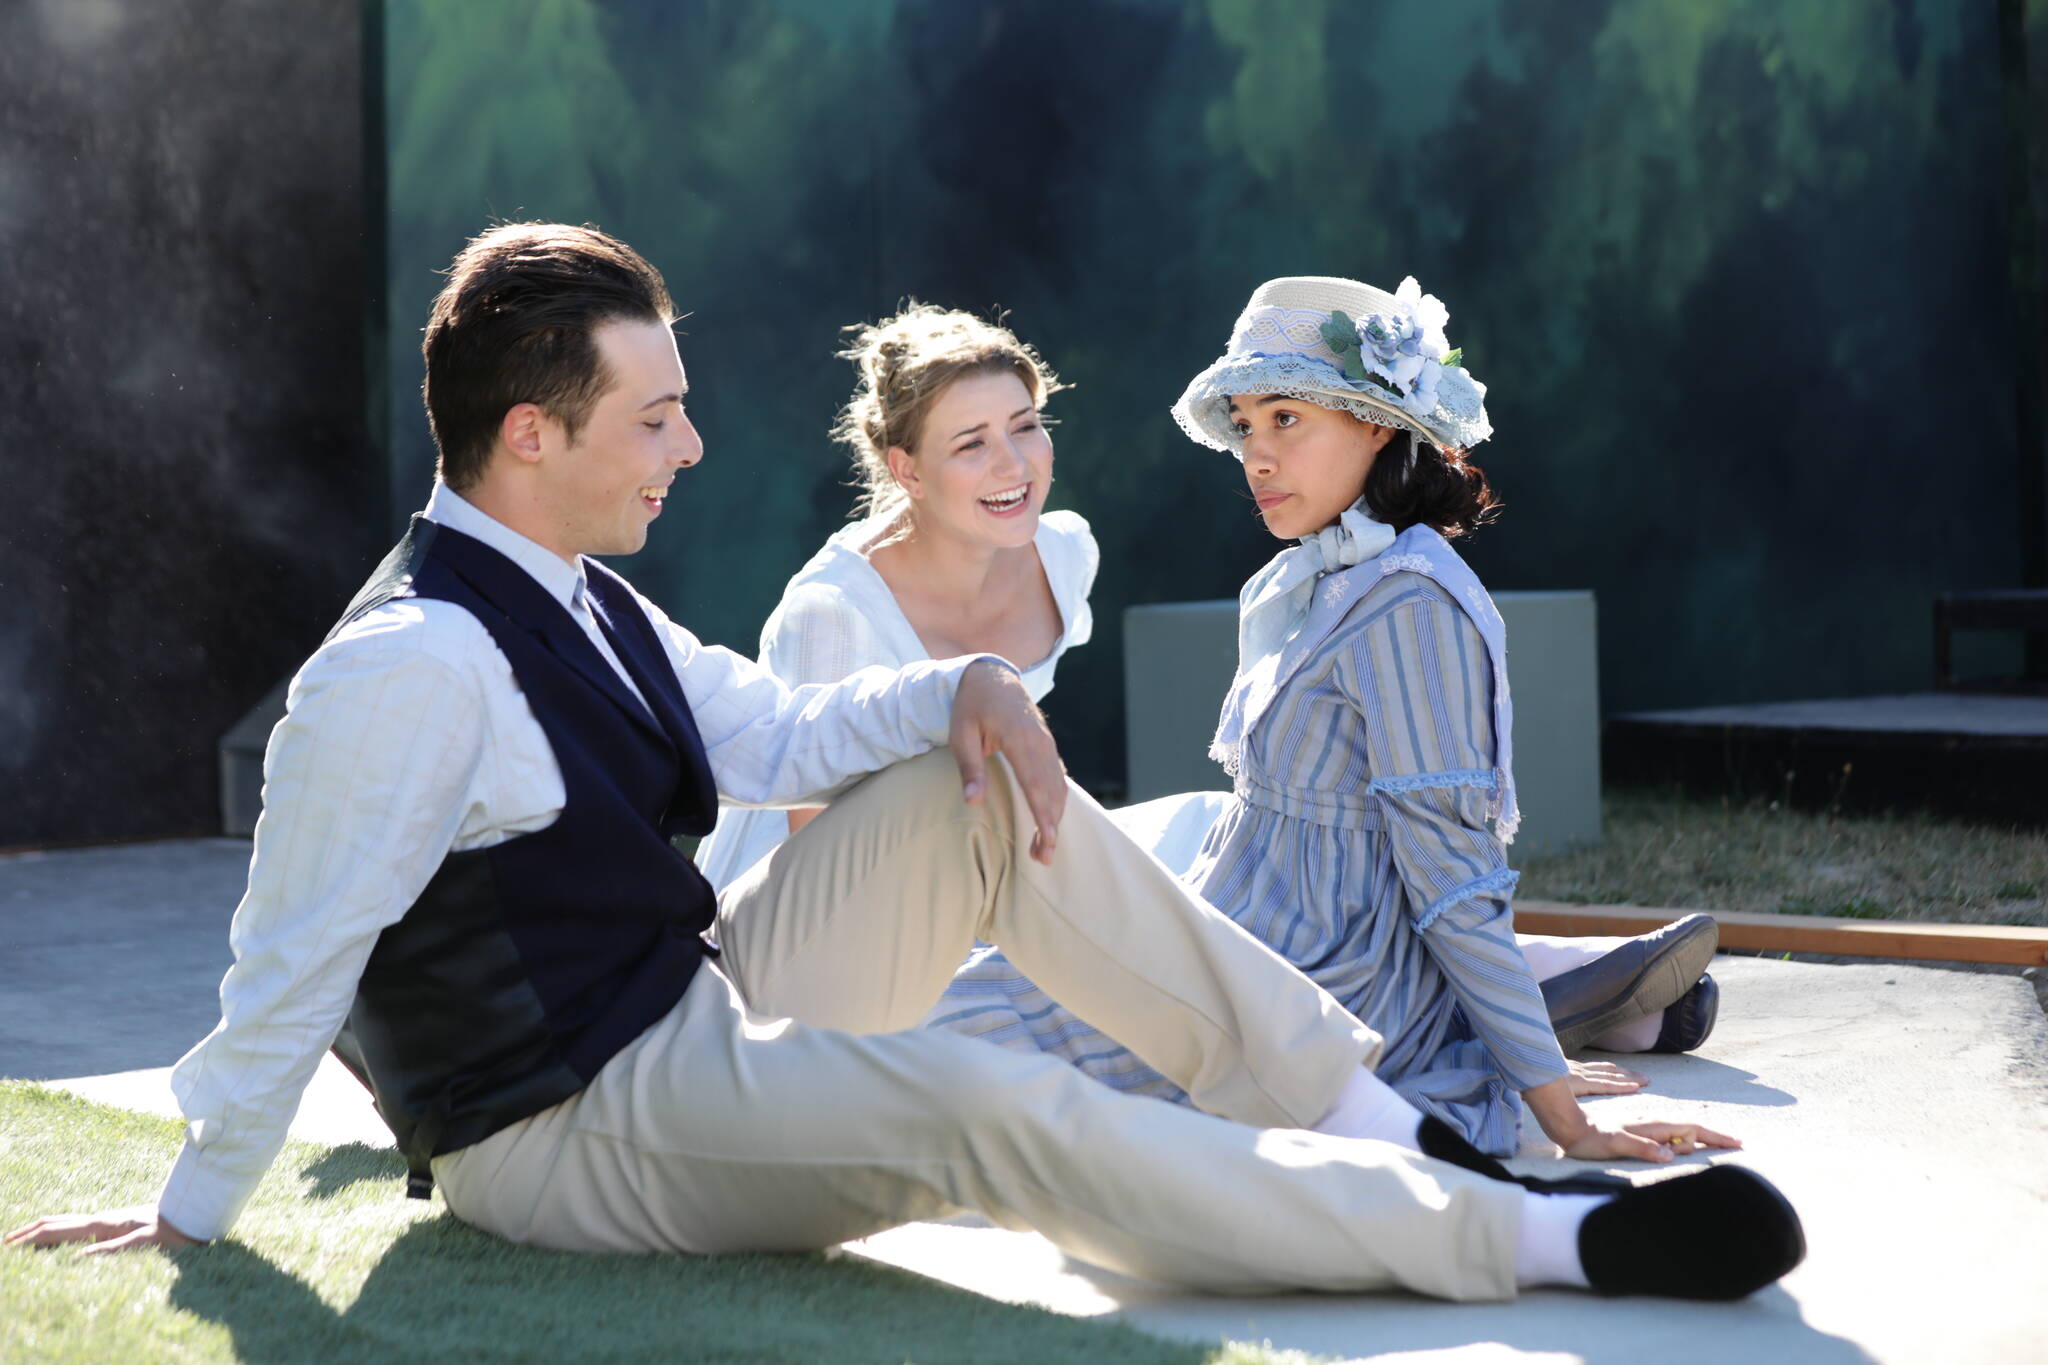 Photo by Michael Stadler
From left to right, Kevin Kantor, Madison McKenzie Scott and Tiffany Iris in Island Shakespeare Festival’s 2018 production of “Sense and Sensibility.”